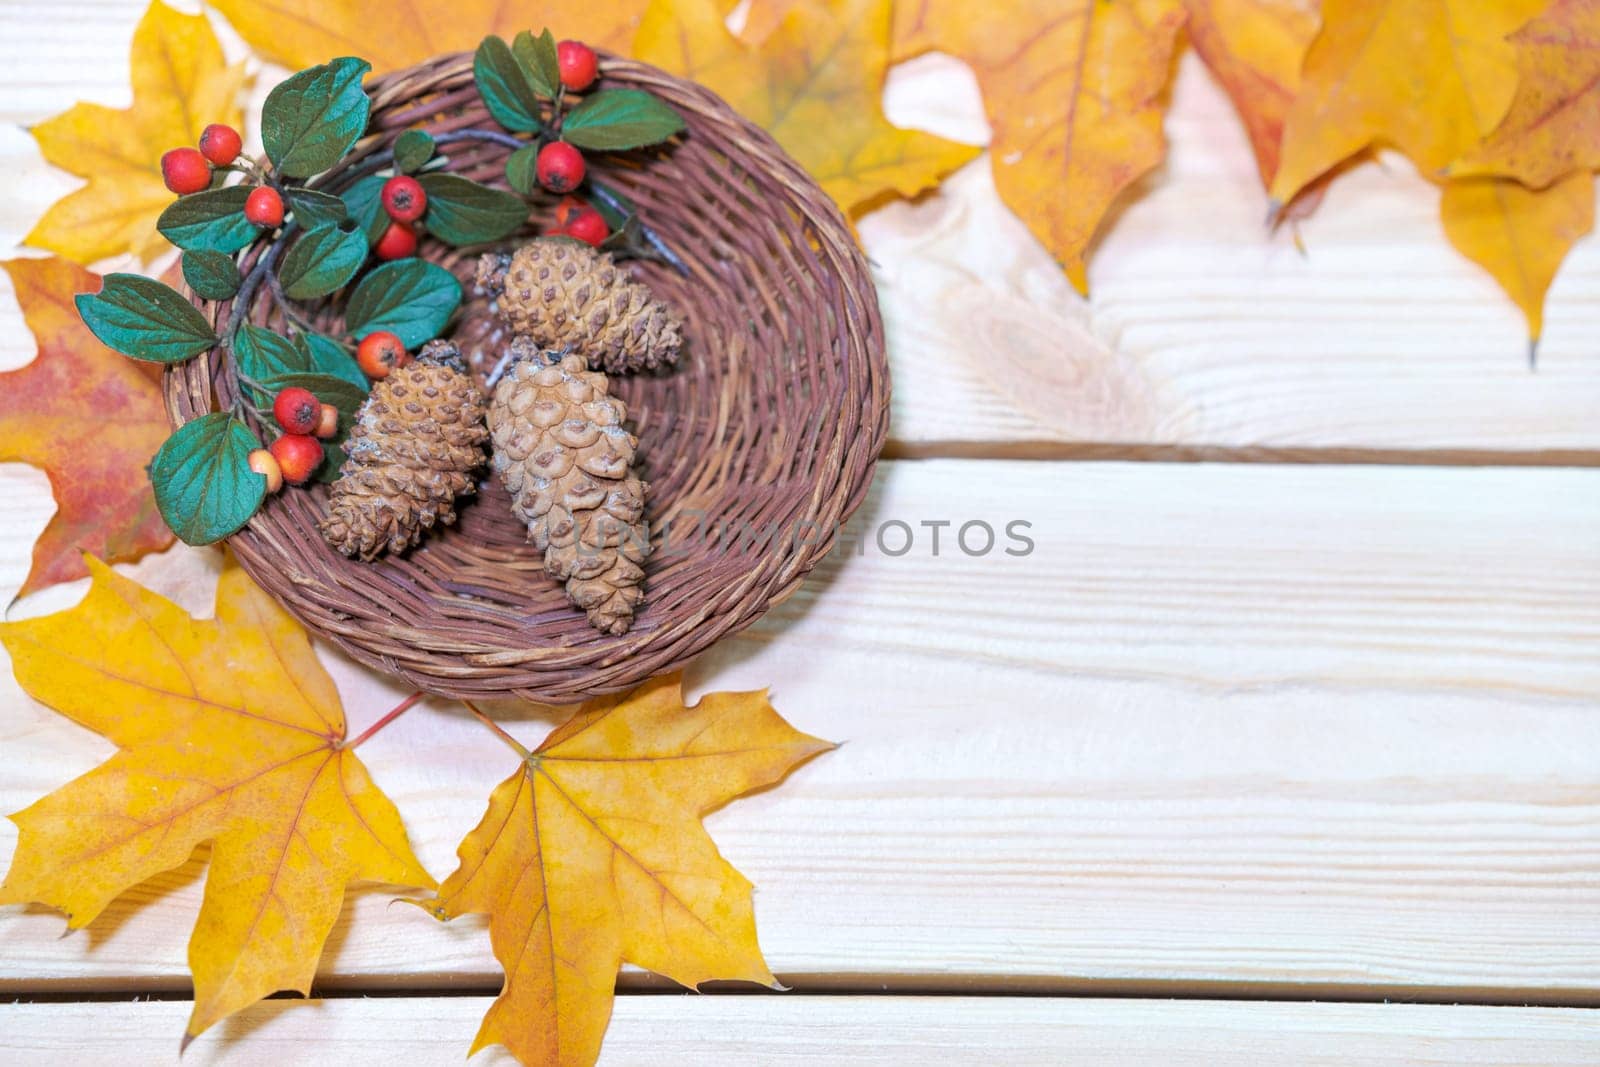 Nature, season and botany concept frame of dry autumn leaves, cones in a basket by EkaterinaPereslavtseva